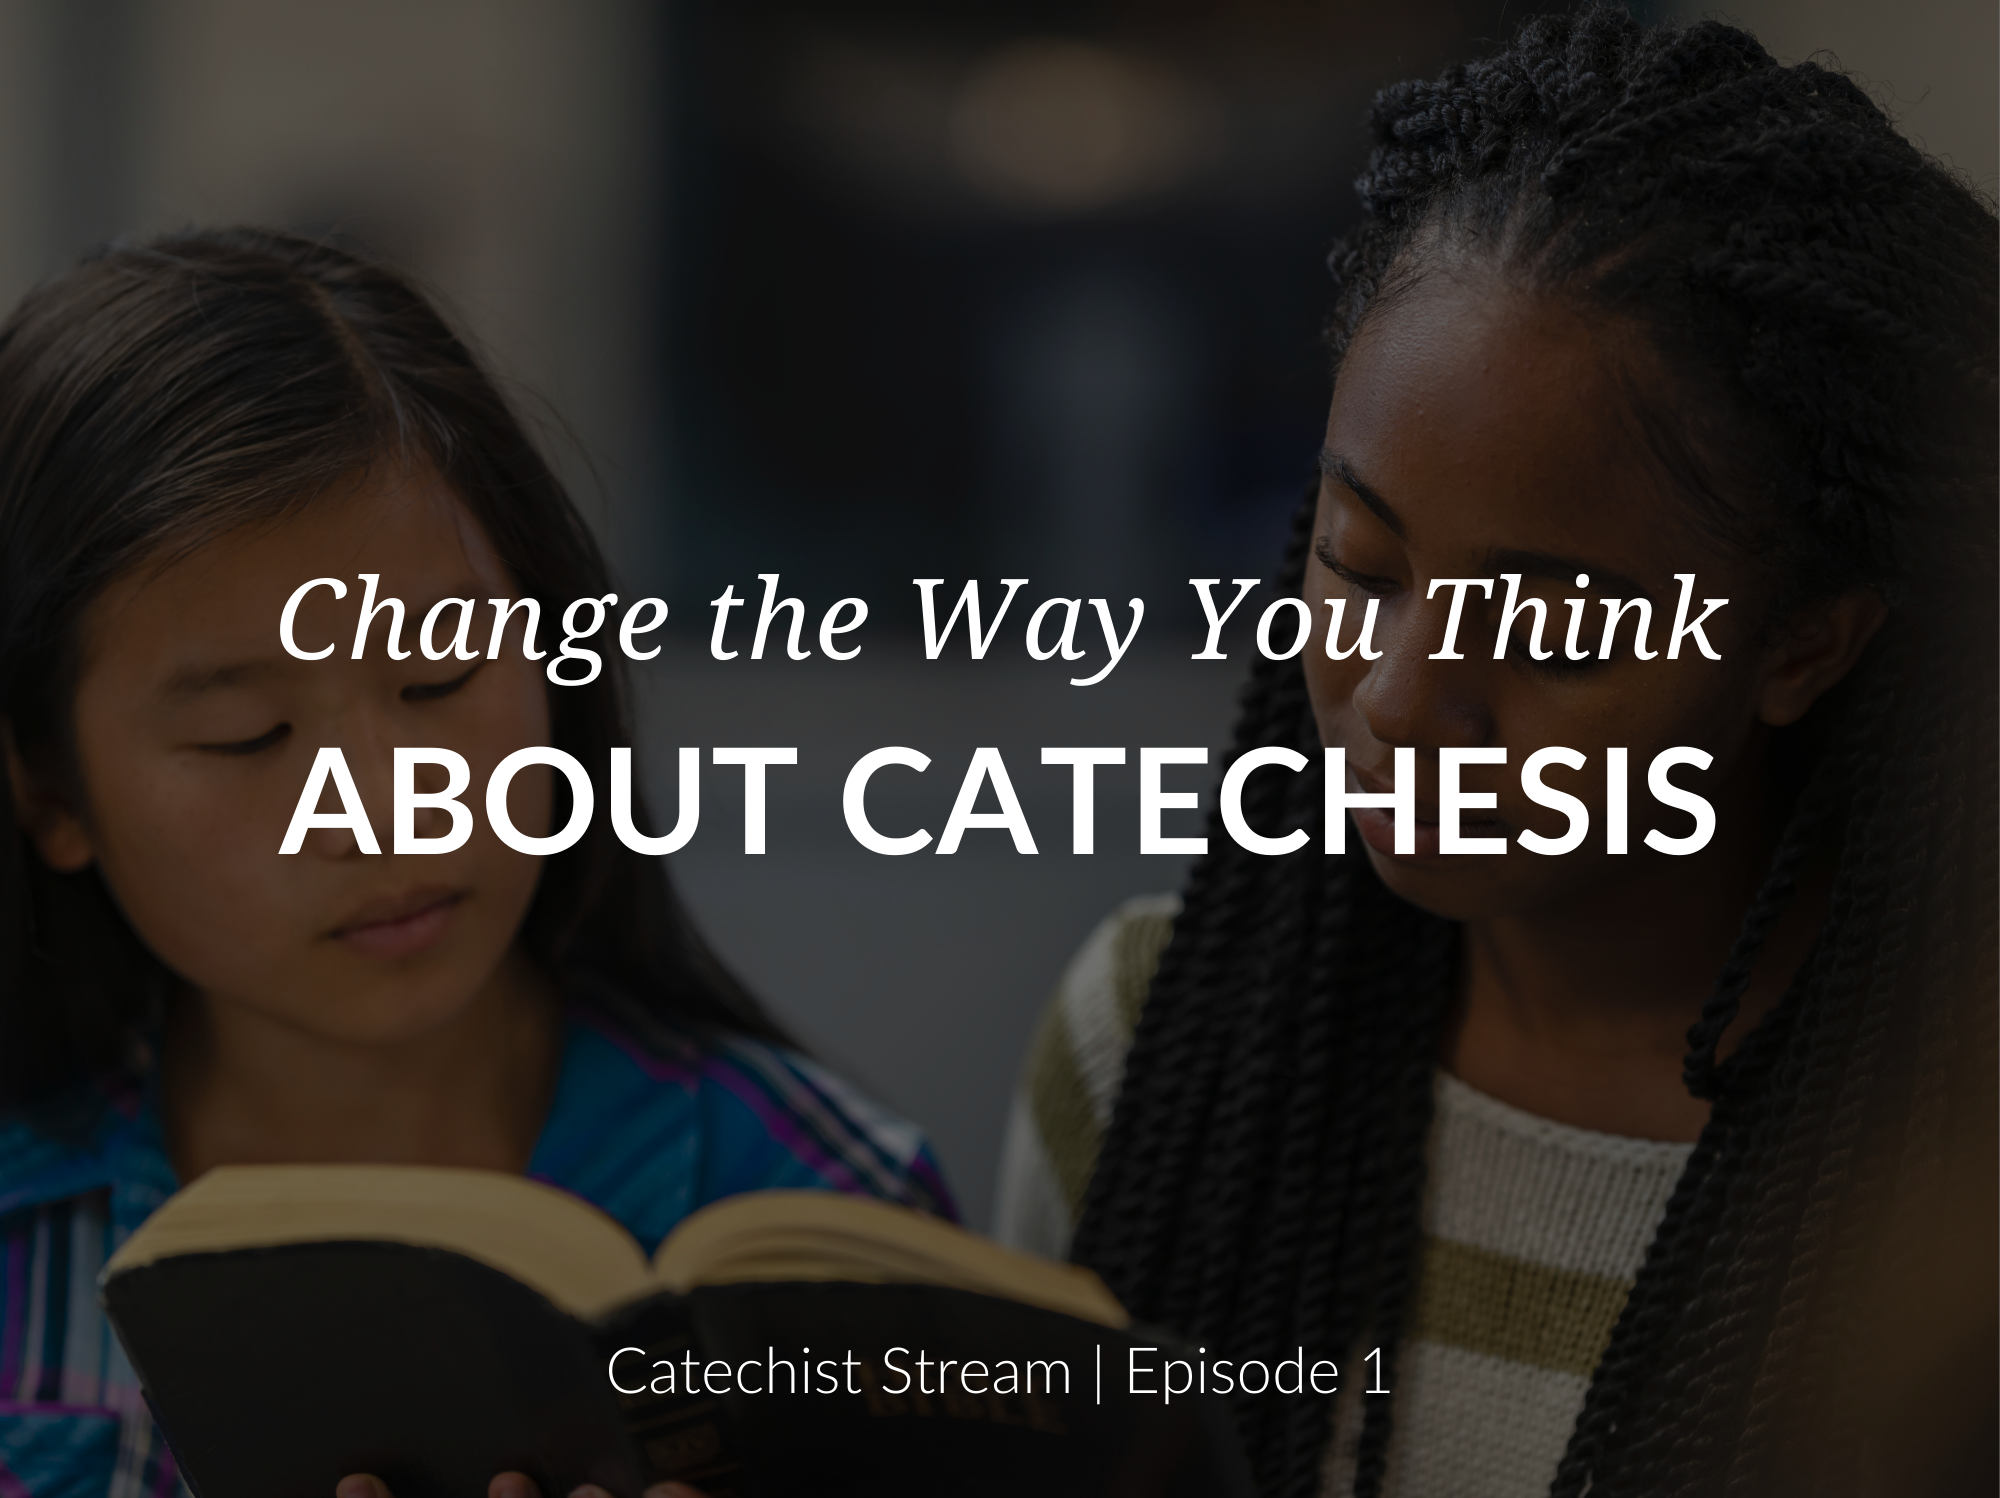 catechist-stream-change-the-way-you-think-about-catechesis